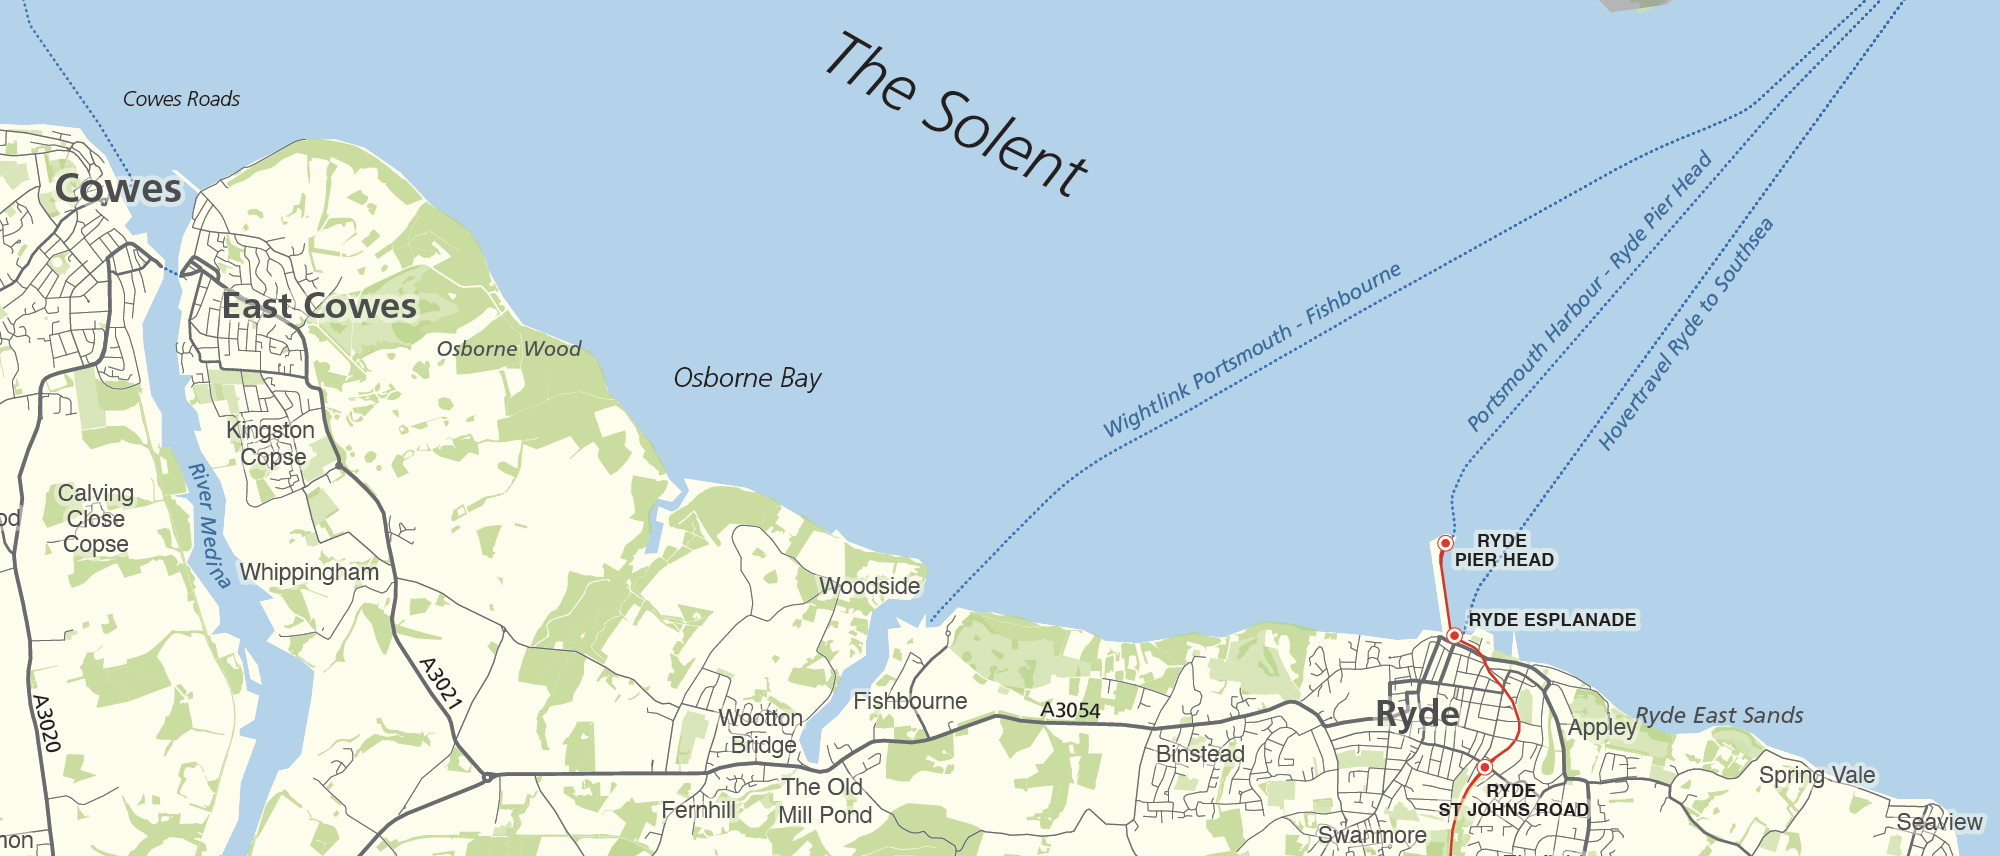 Detail from the Isle of Wight map